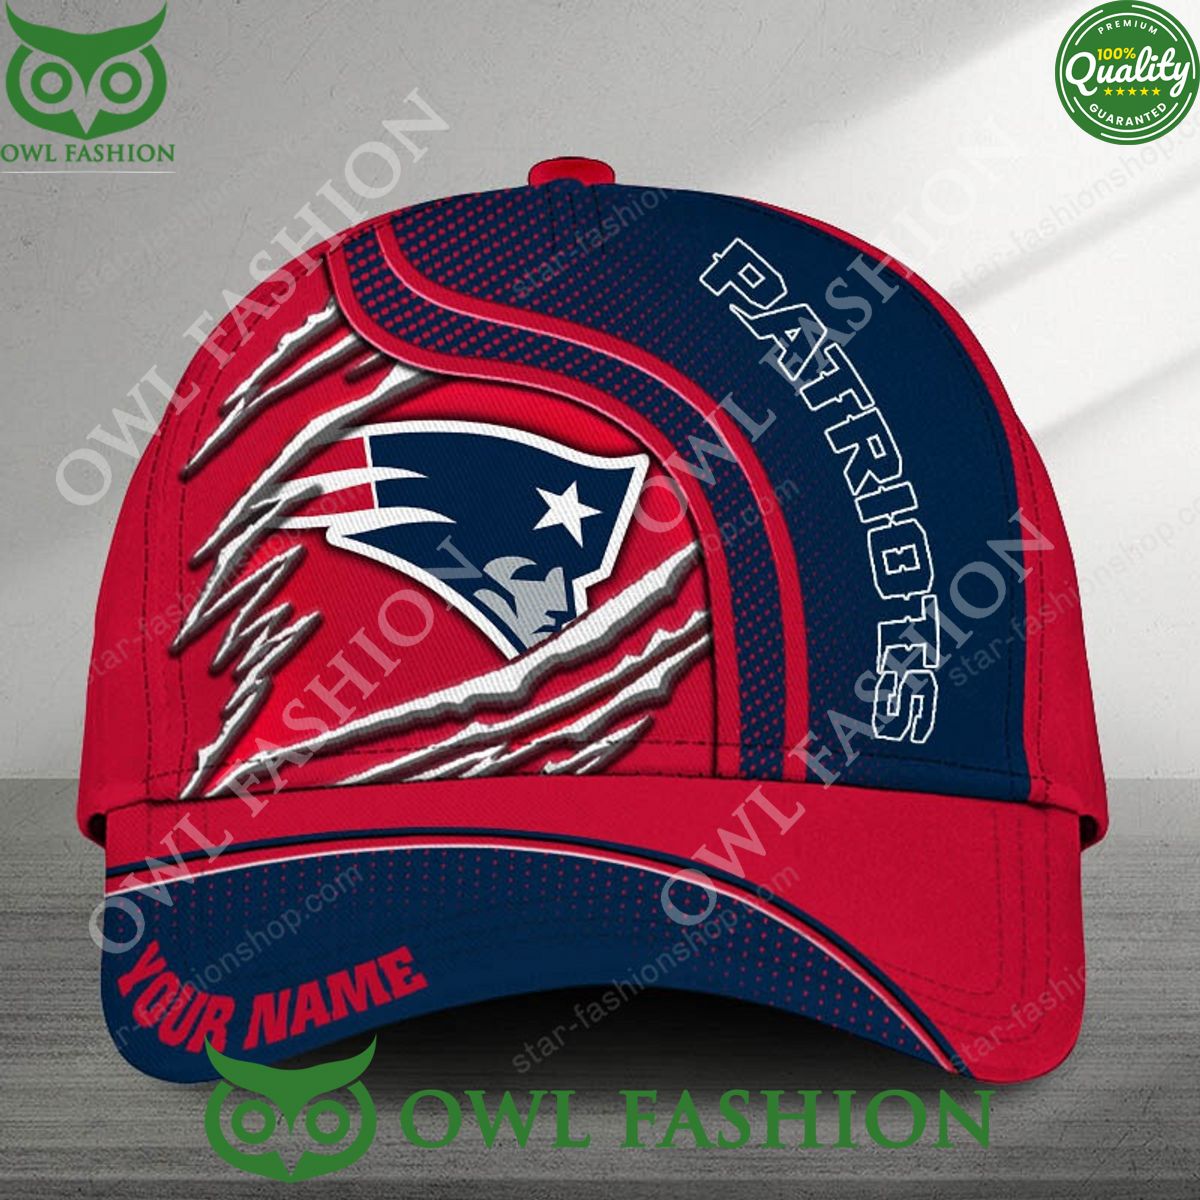 Personalized New England Patriots NFL Printed Cap Nice shot bro